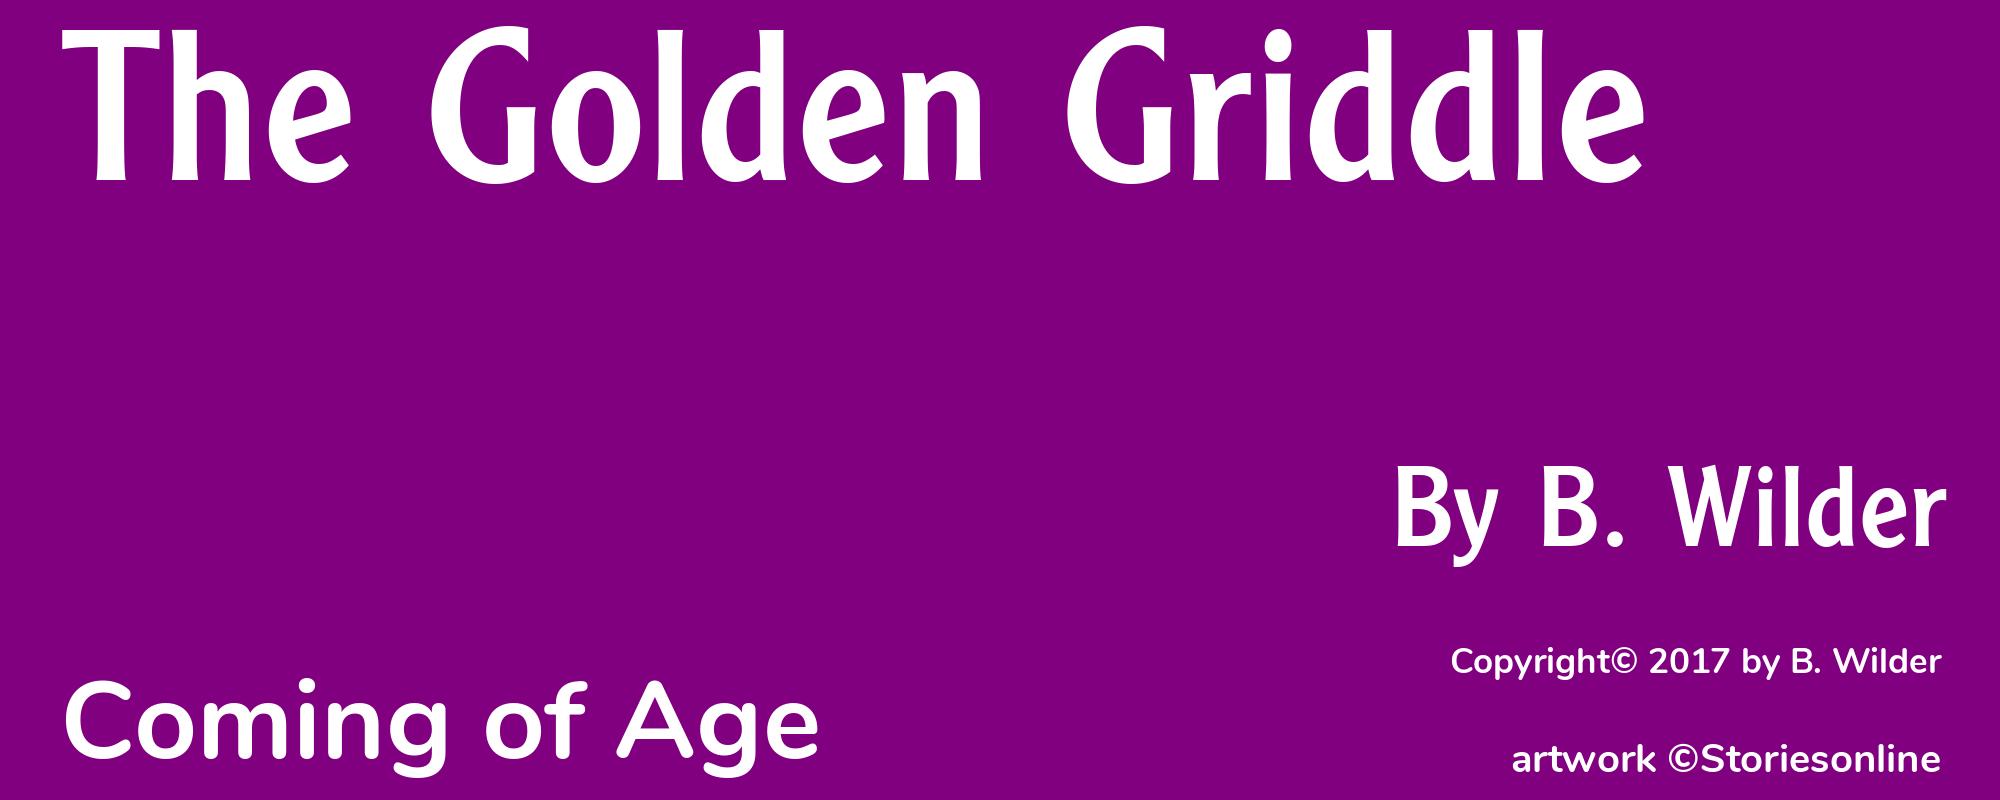 The Golden Griddle - Cover